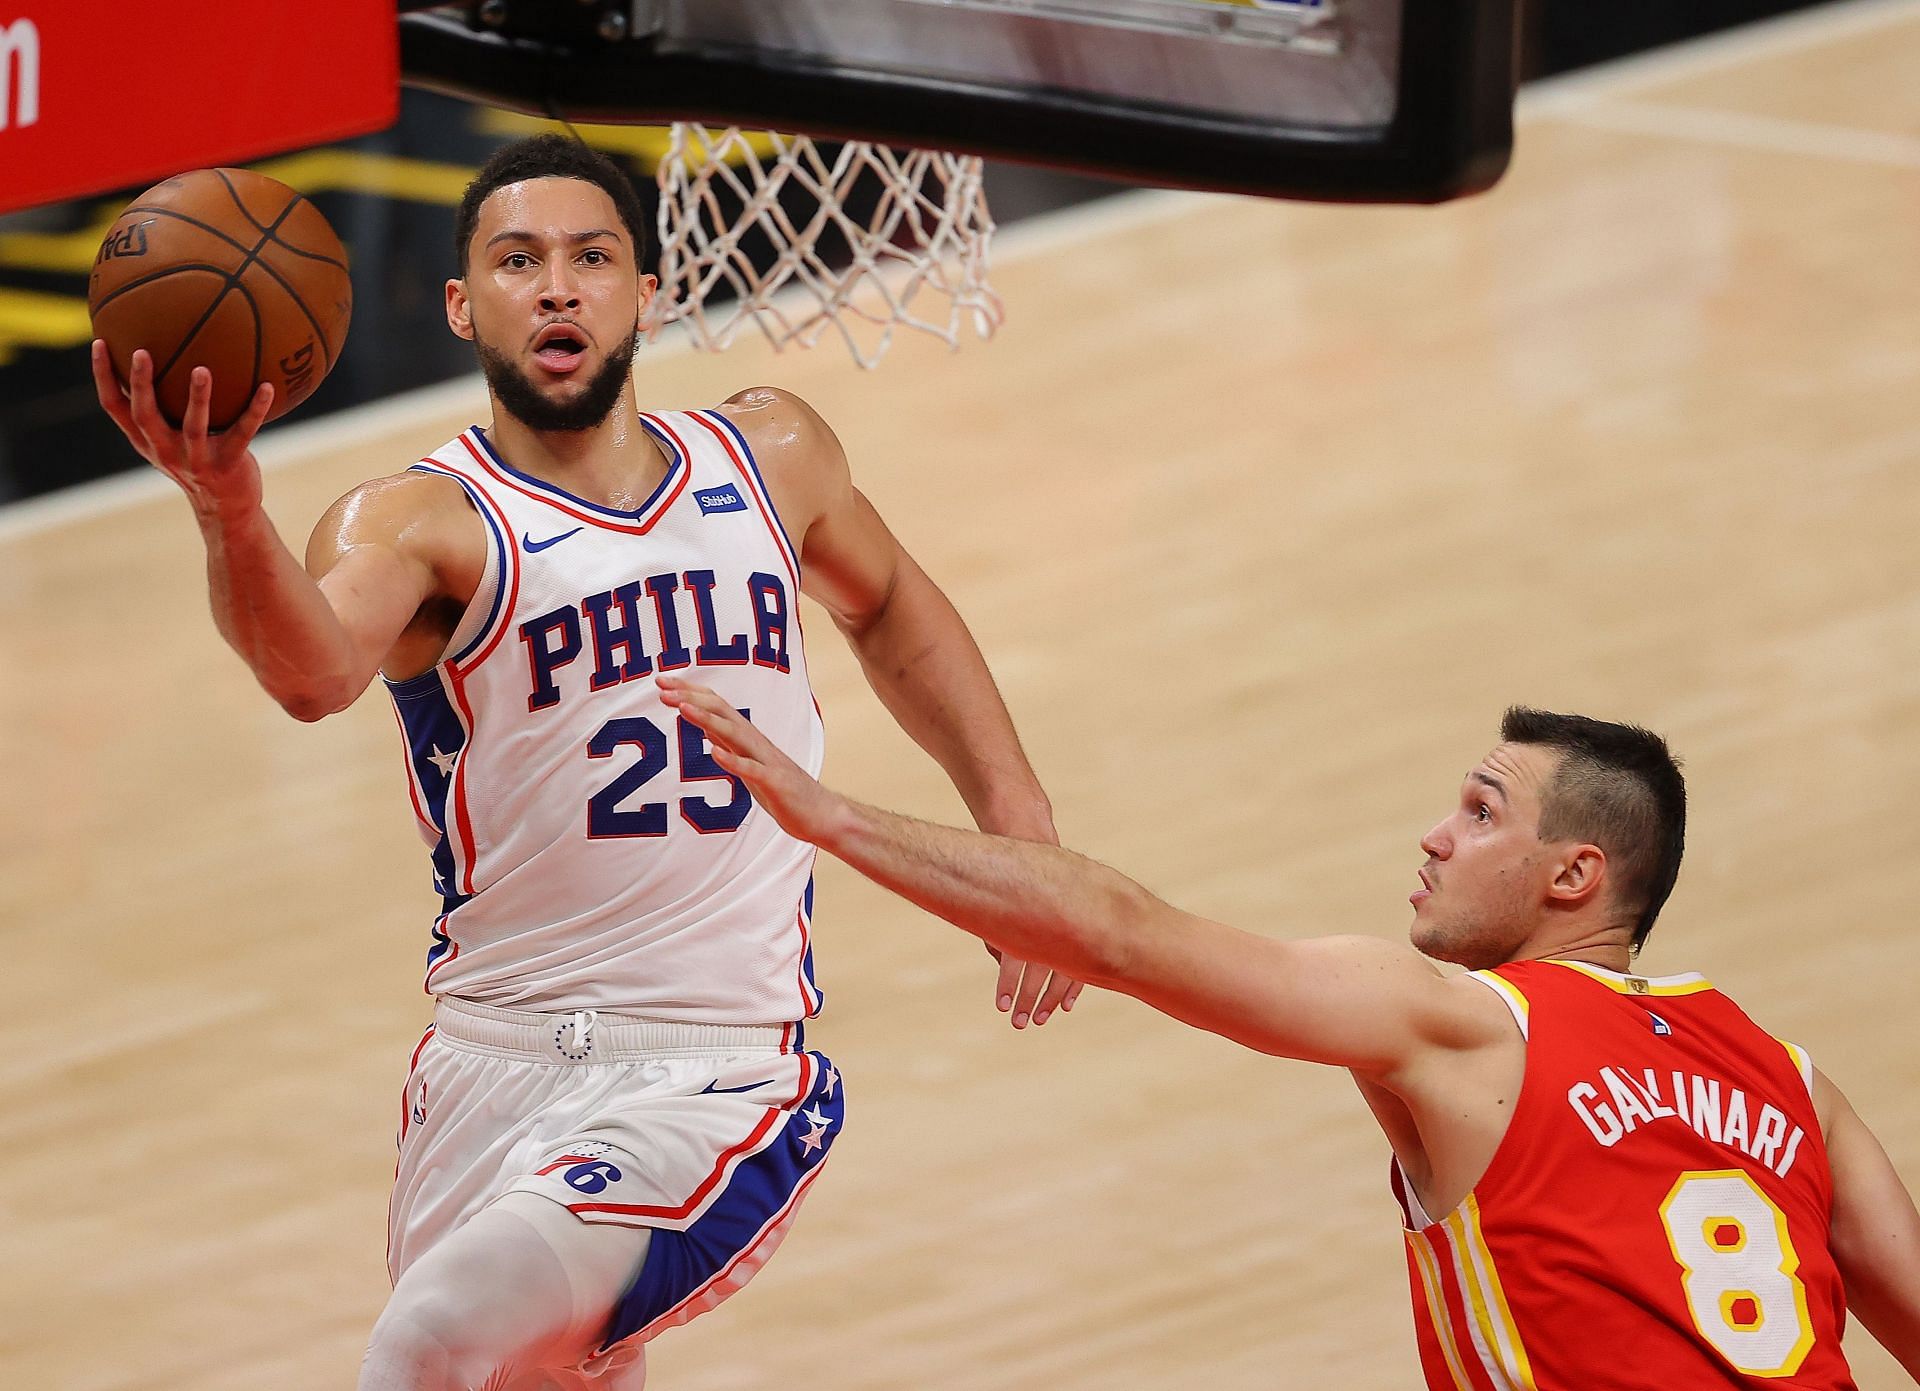 Ben Simmons of the Philadelphia 76ers drives against Danilo Gallinari of the Atlanta Hawks during Game 3 of the Eastern Conference semifinals on June 11, 2021, in Atlanta, Georgia.